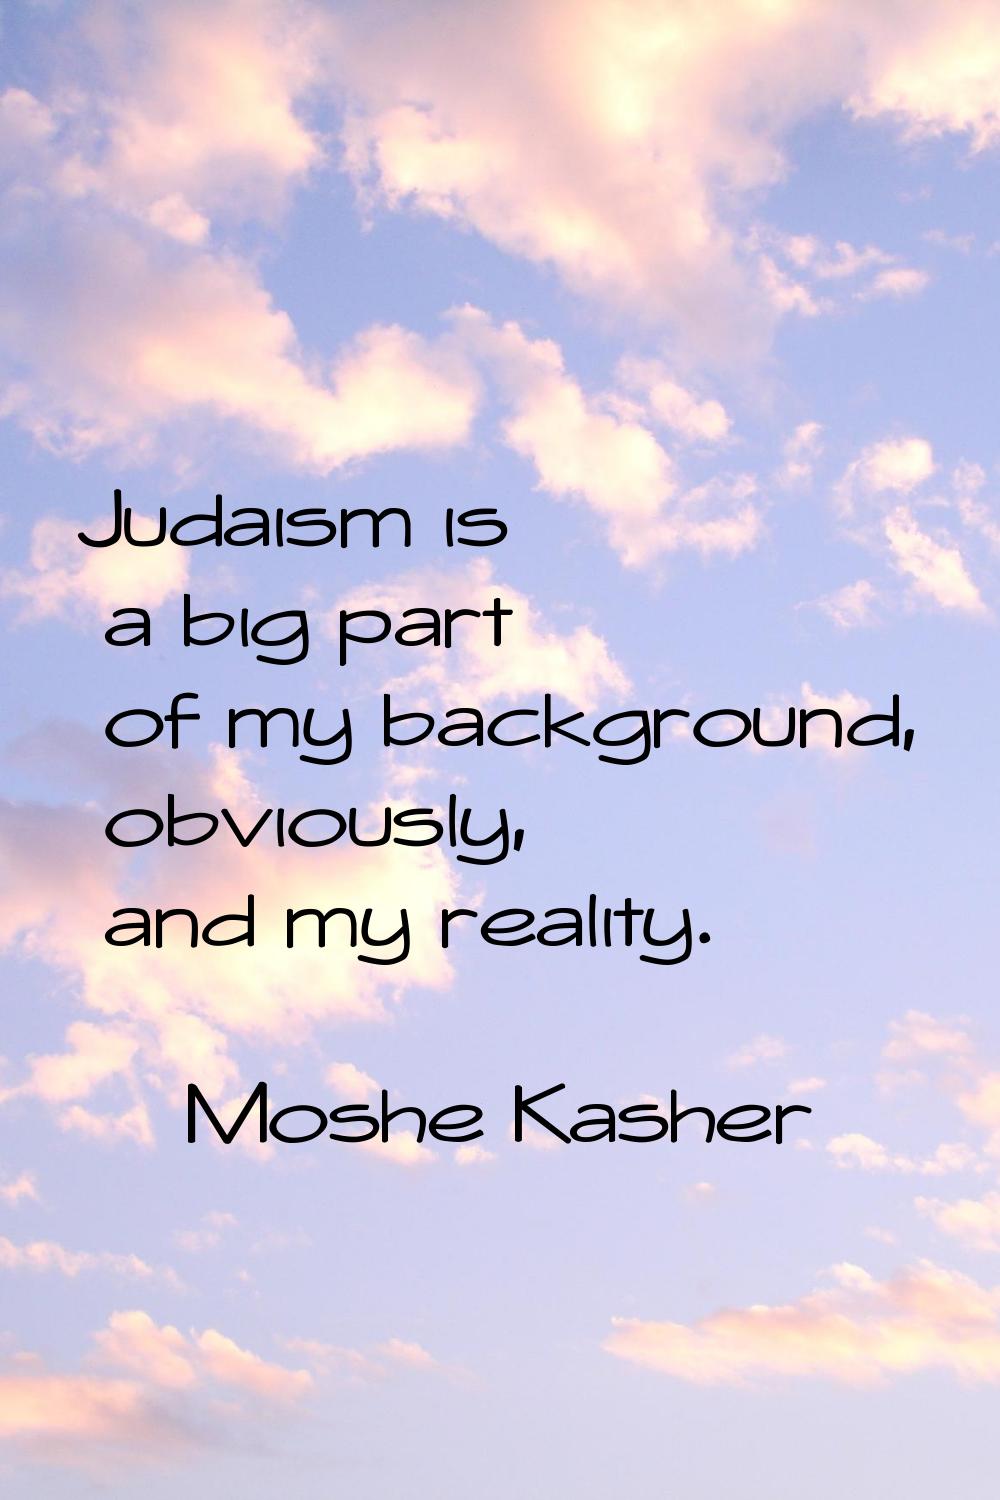 Judaism is a big part of my background, obviously, and my reality.